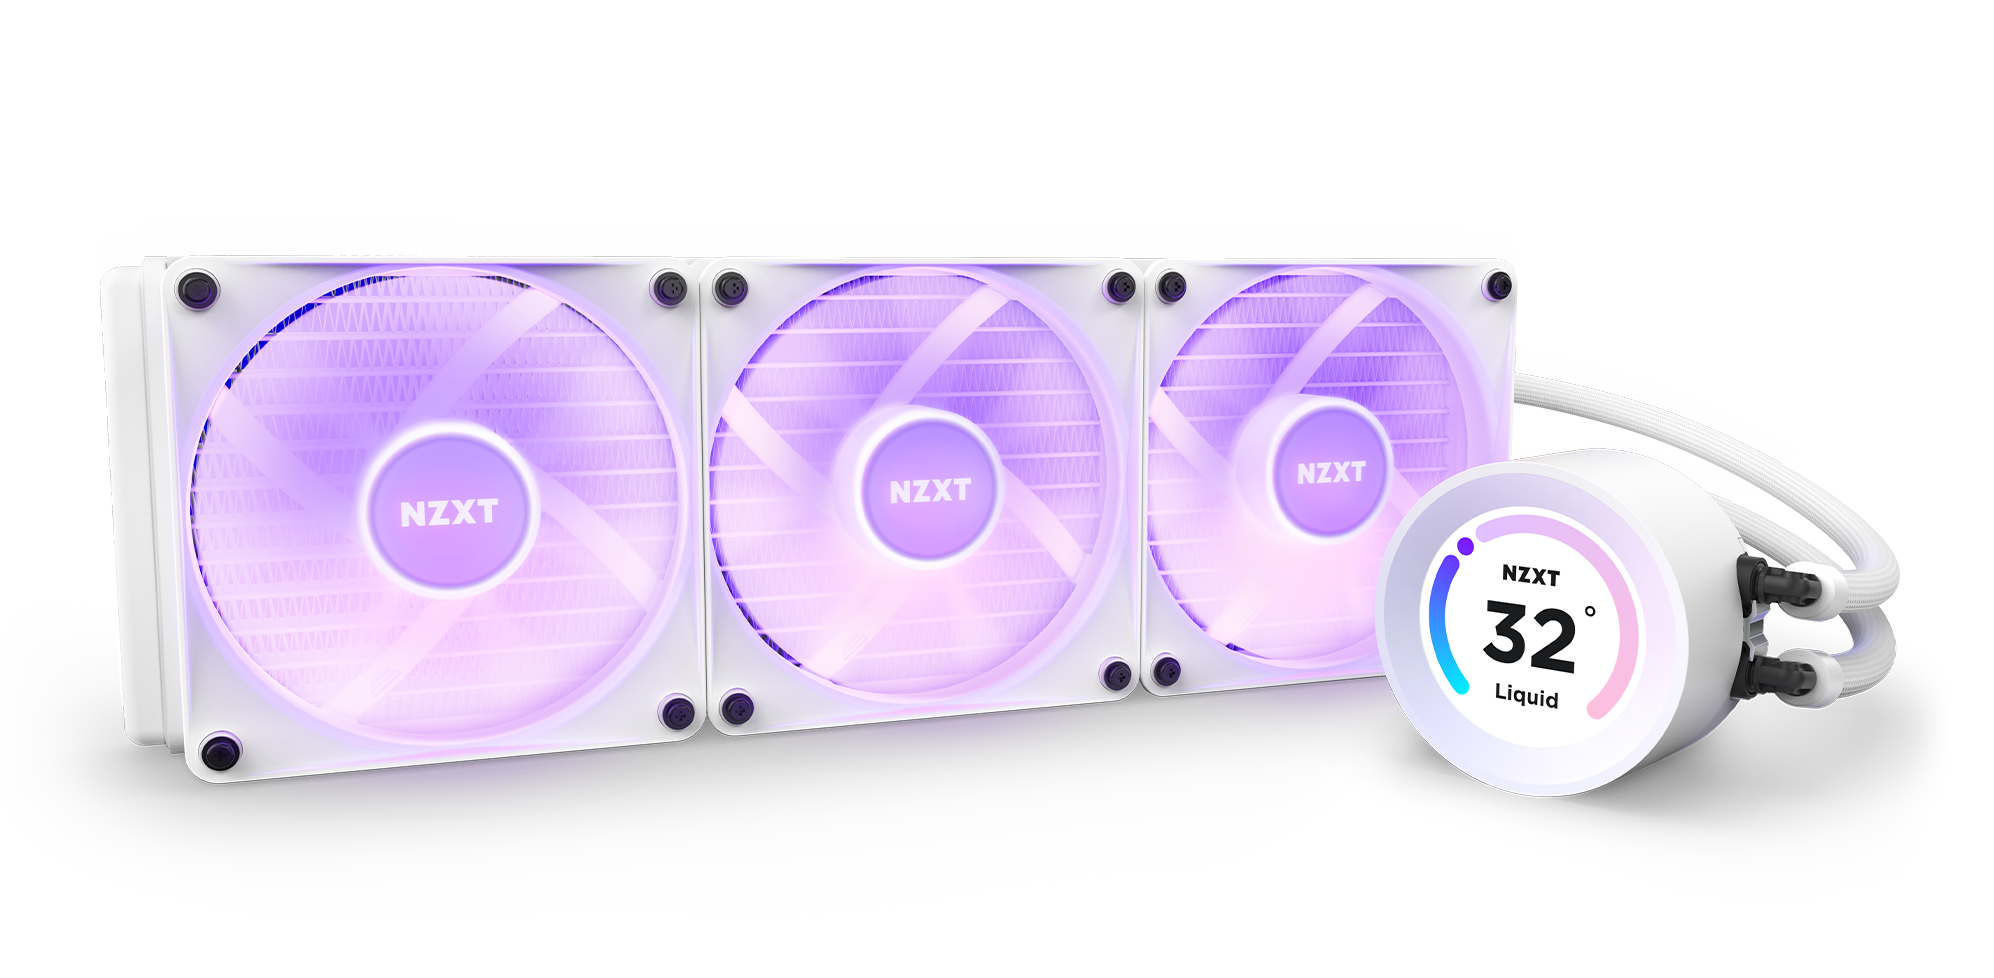 NZXT Announces Their Newest Line of Krakens AIO Liquid Coolers